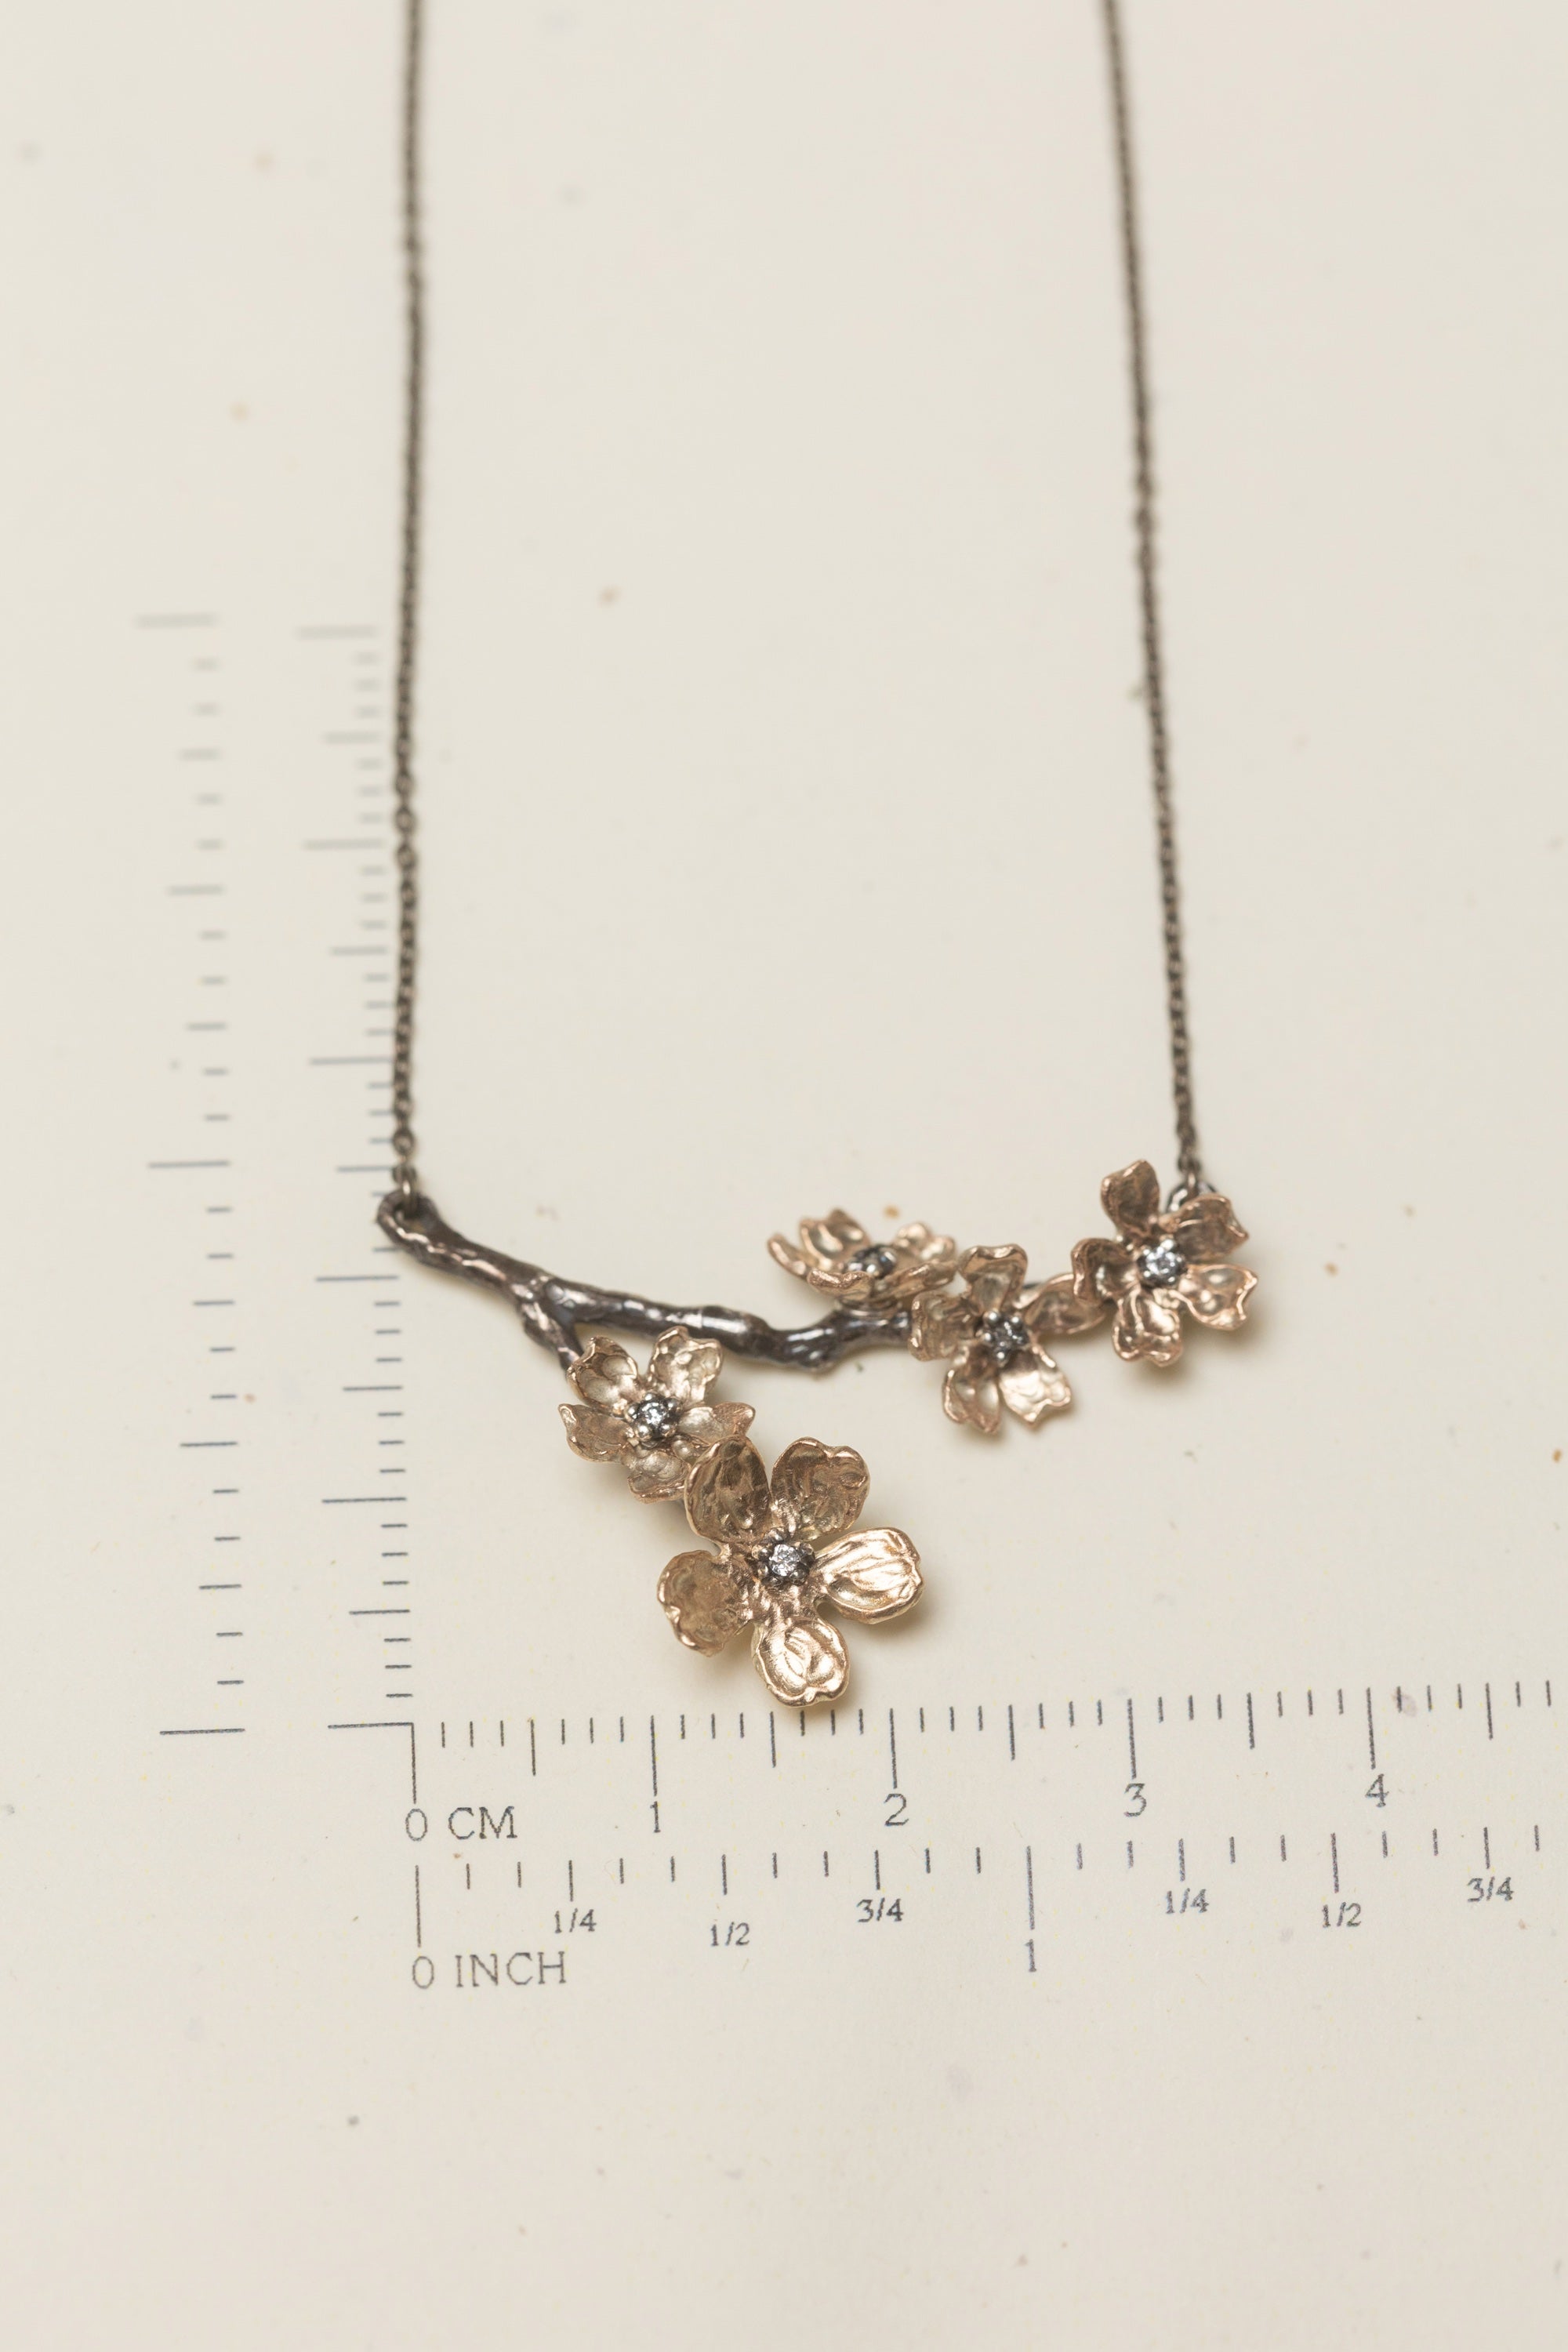 5 Sakura Blossom Necklace with Silver Chain